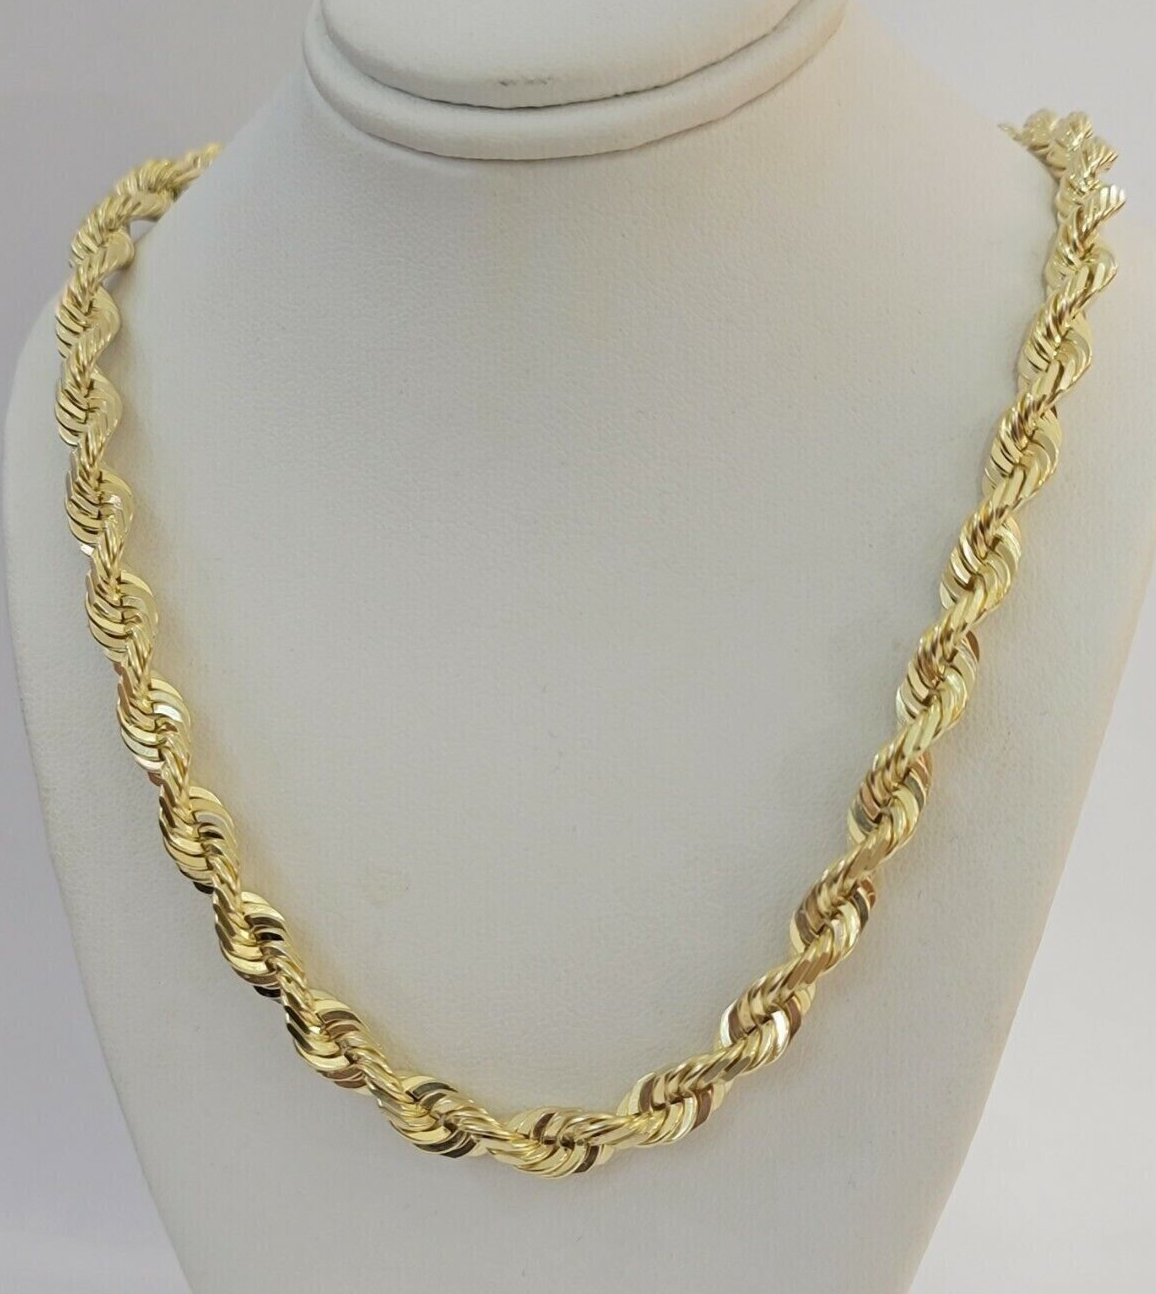 7mm Rope chain Necklace Solid 10k Yellow Gold Diamond cut 24